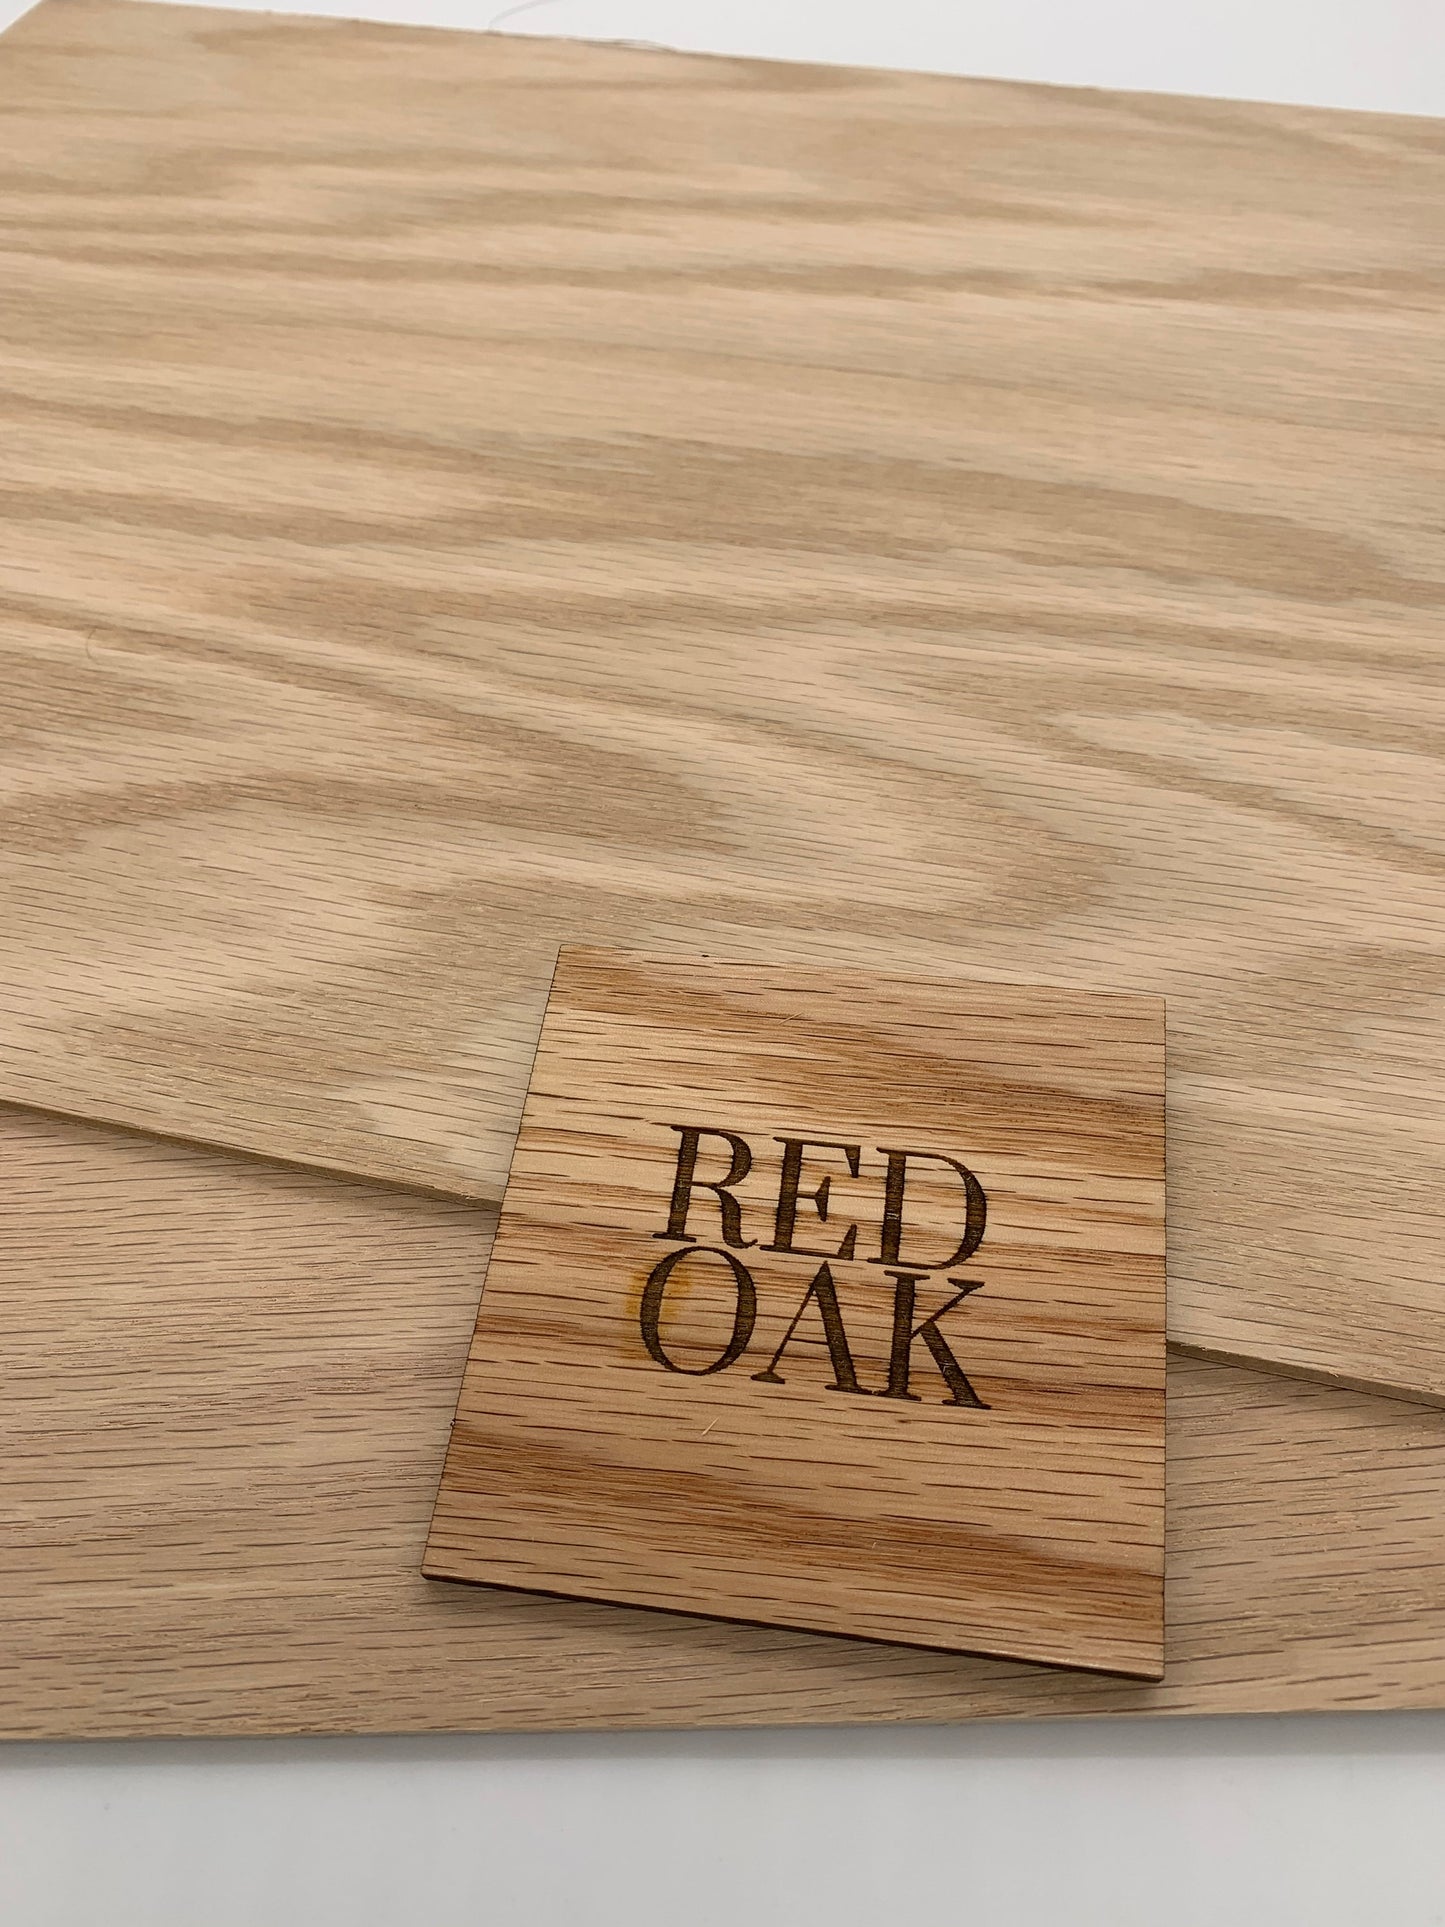 1/8 RED OAK Plywood / Red Oak for laser cutters